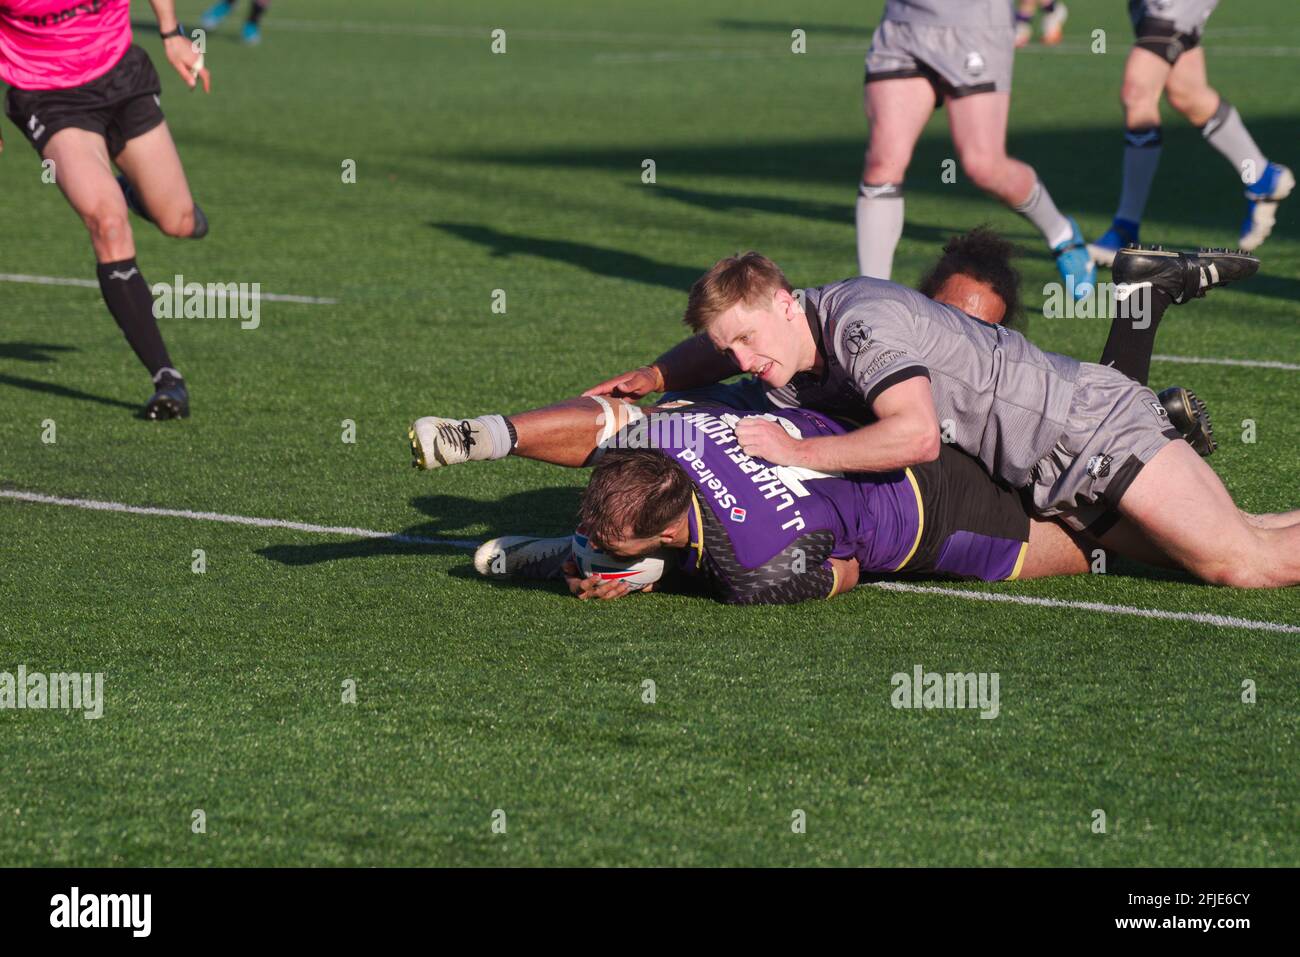 Newcastle upon Tyne, England, 25 April 2021. Ted Chapelhow diving to score a try for Newcastle Thunder against Sheffield Eagles in the Betfred Championship match at Kingston Park. Credit: Colin Edwards/Alamy Live News. Stock Photo